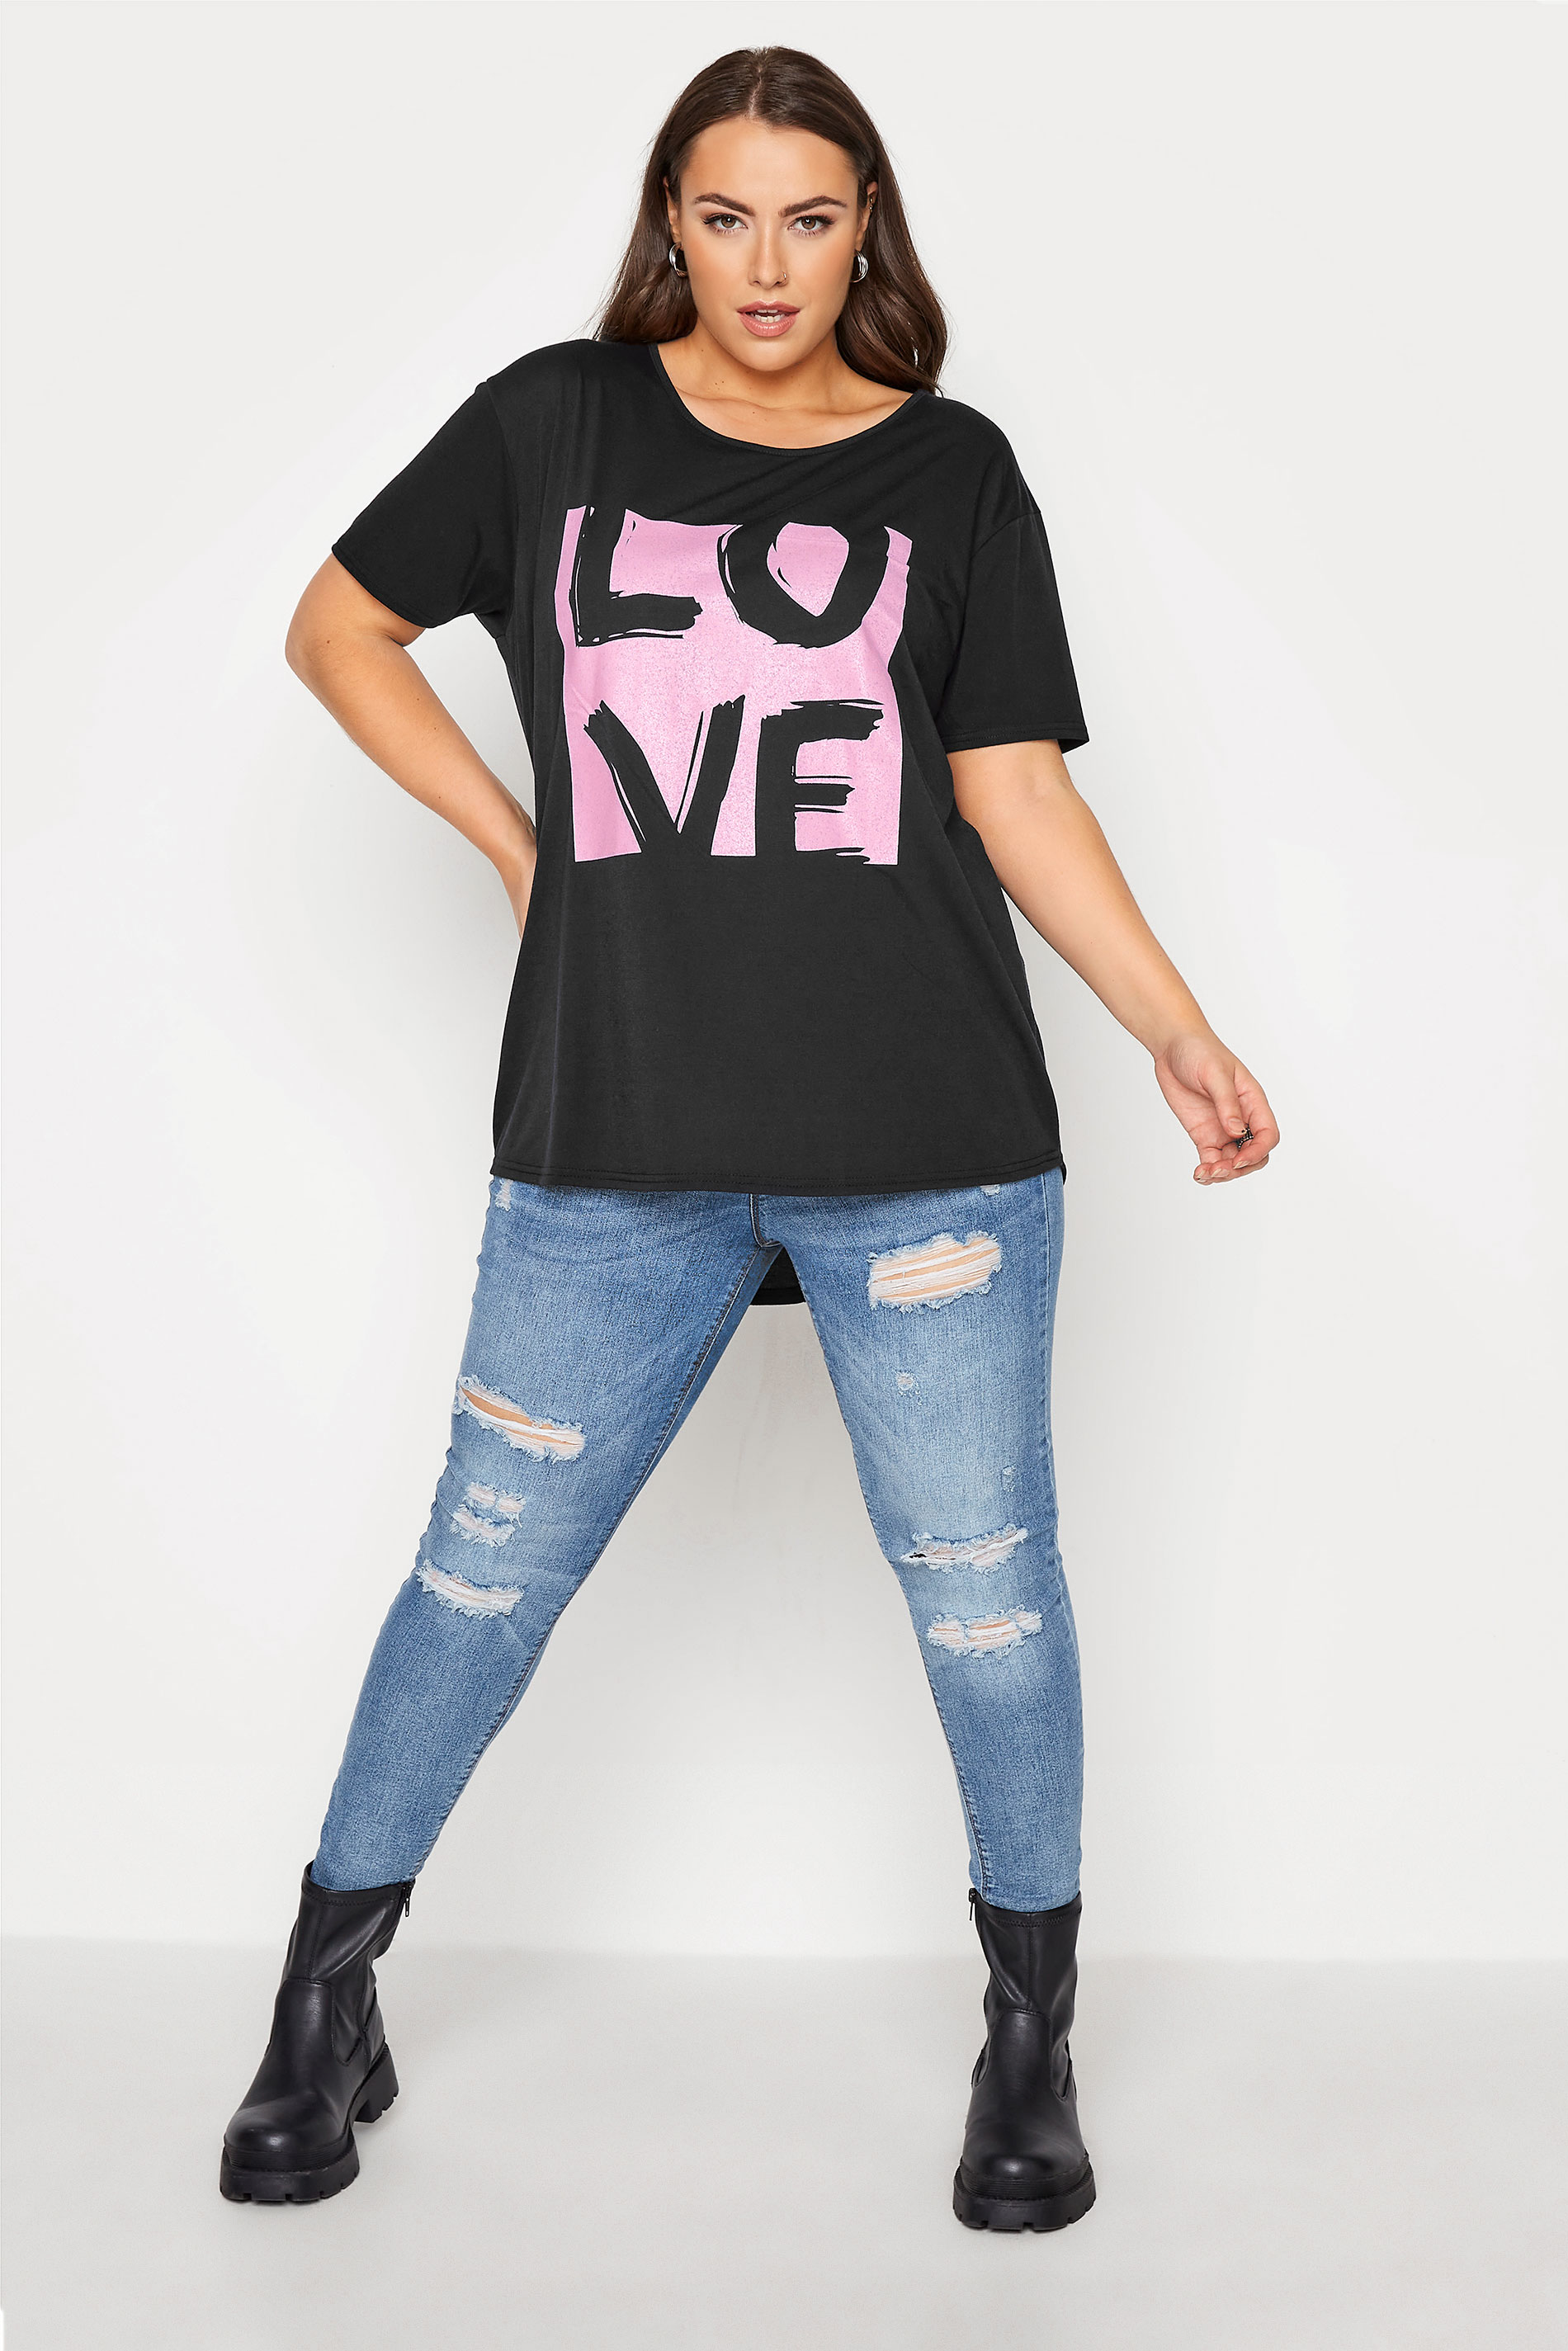 Grande taille  Tops Grande taille  Tops Casual | T-Shirt Noir 'Love' Style Boyfriend - BY93400